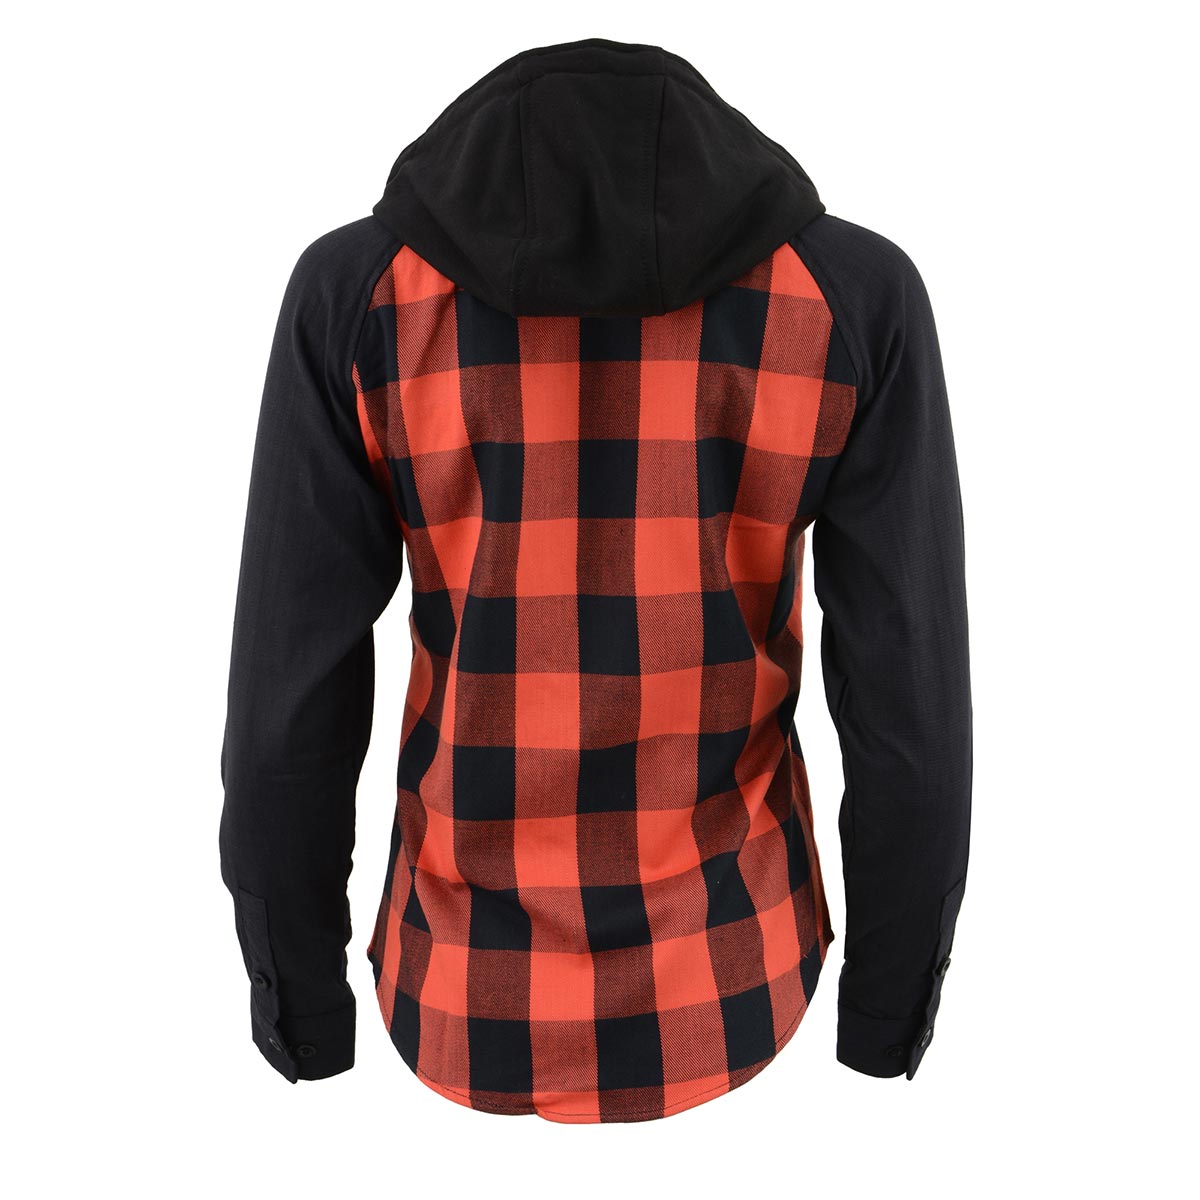 NexGen MNG21602 Women's Casual Black and Red Long Sleeve Cotton Flannel Shirt with Hoodie